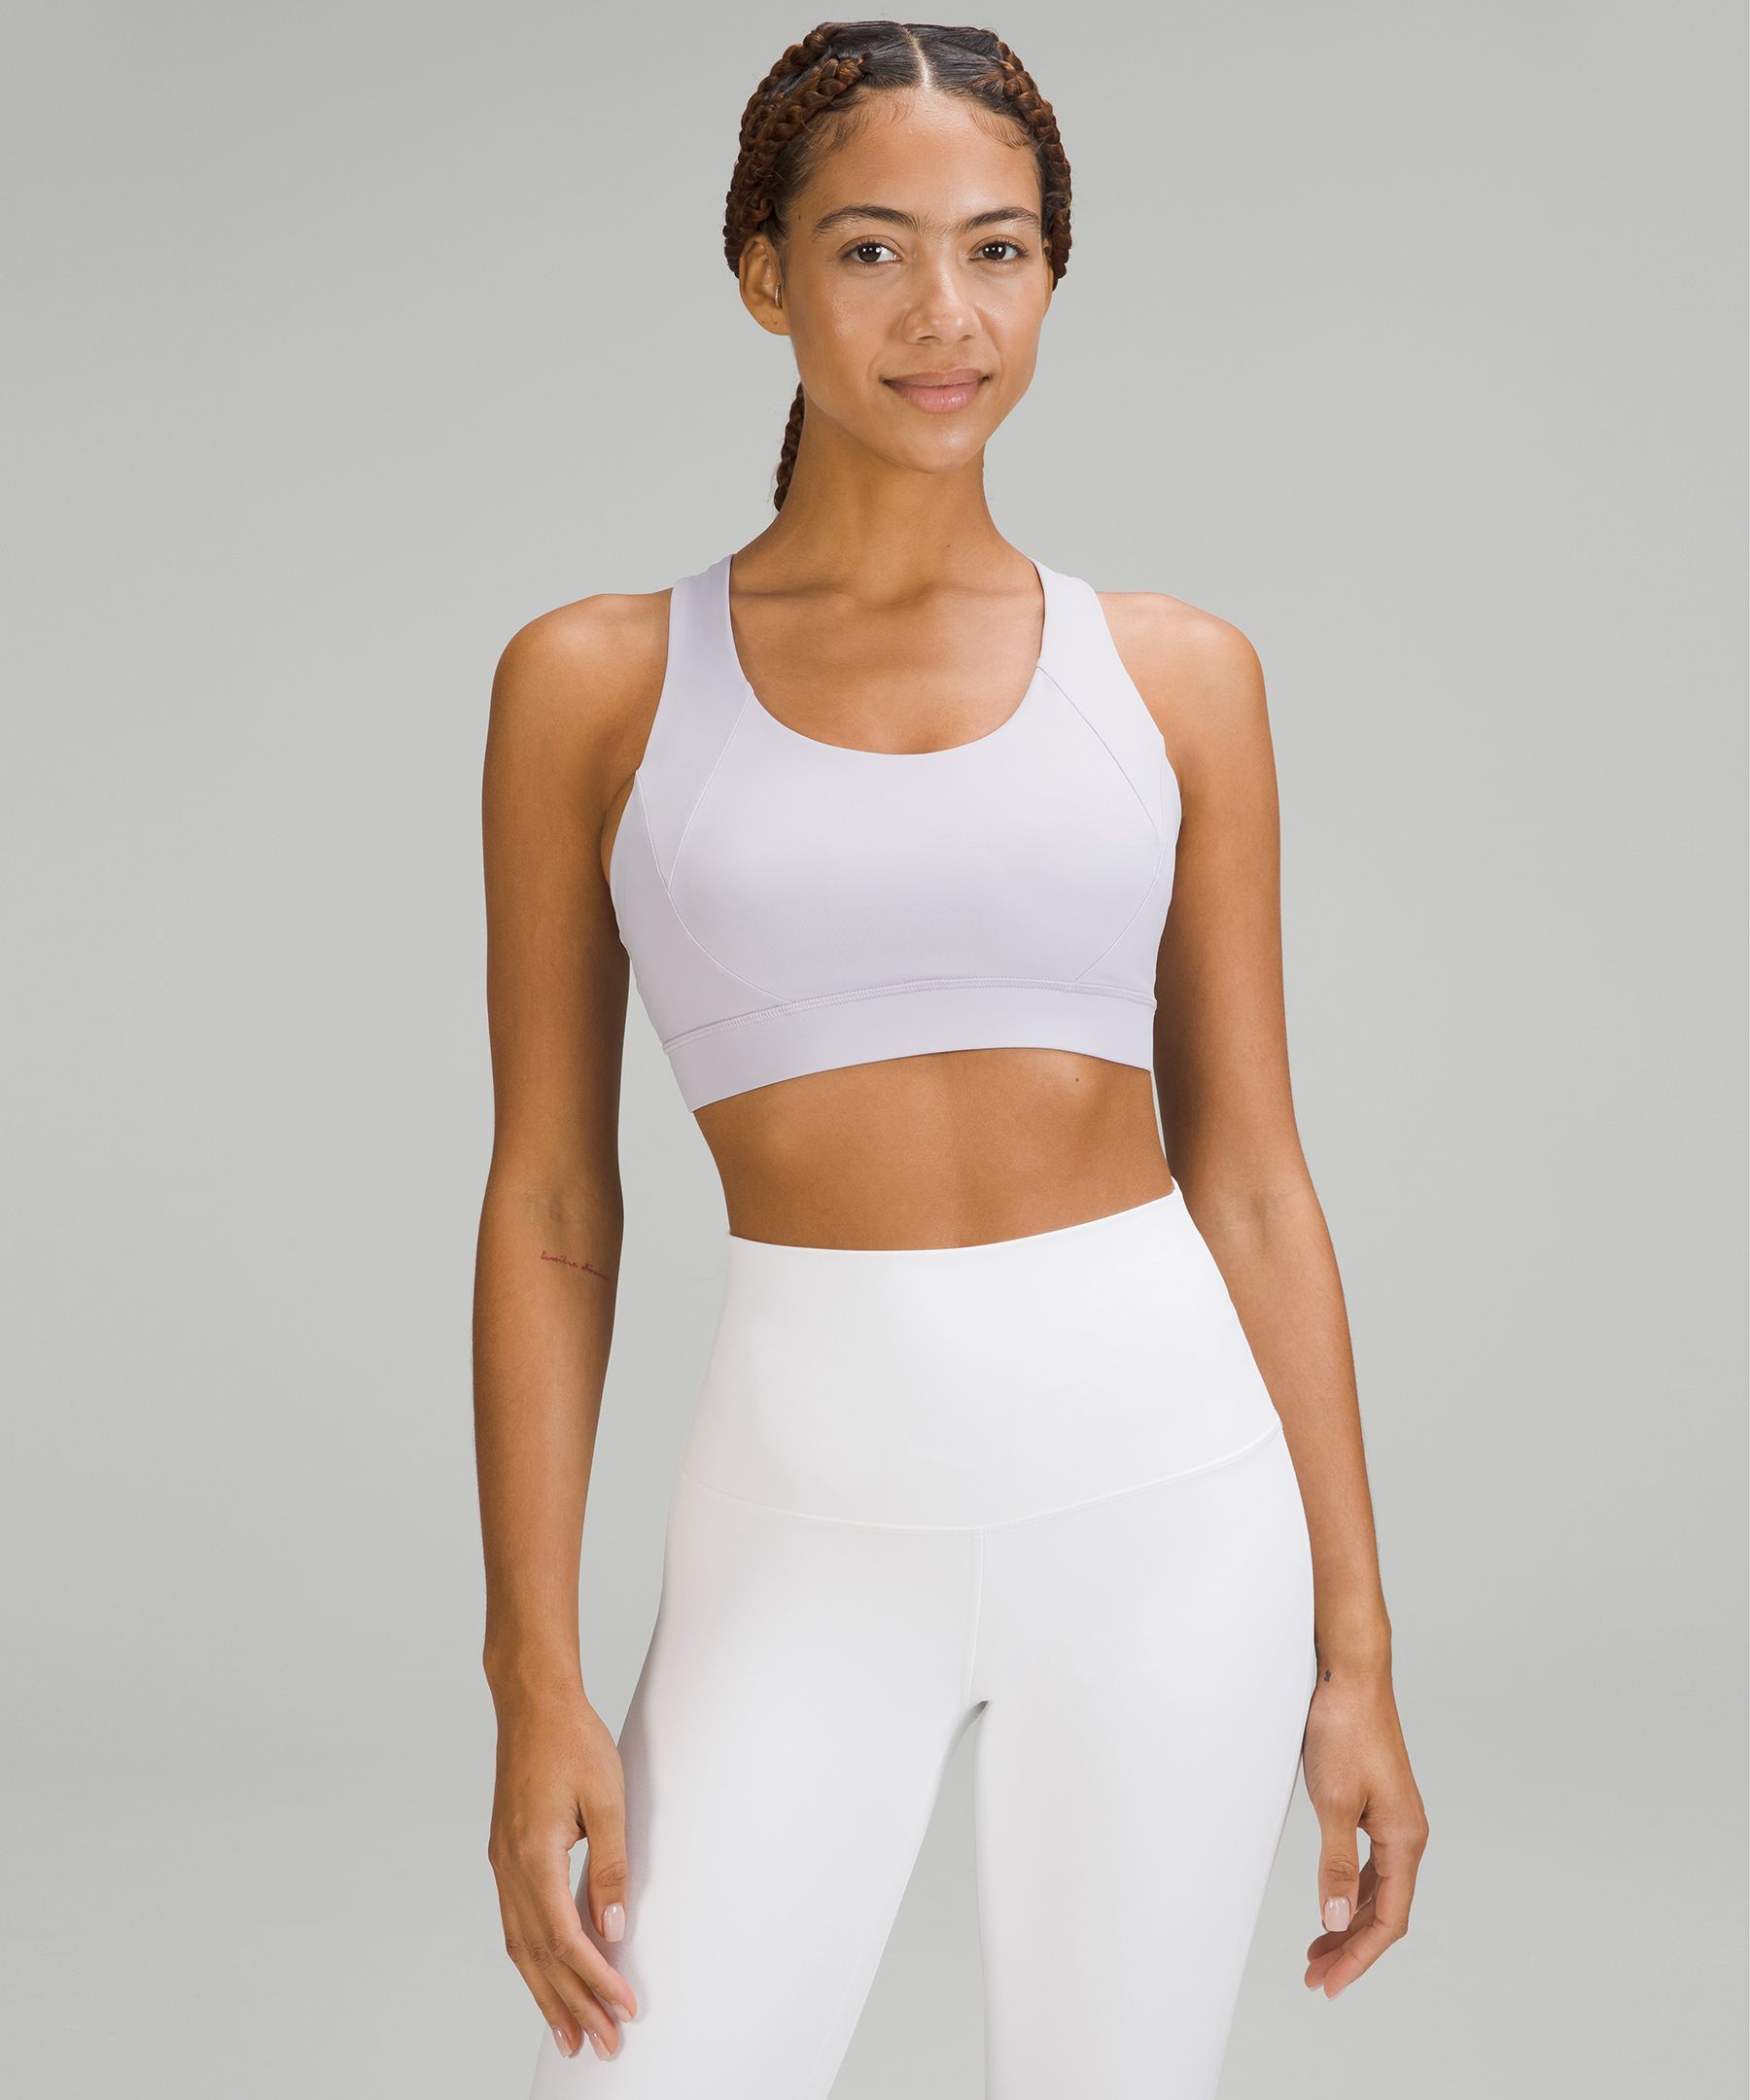 Lululemon Free To Be Elevated Bra Light Support, Dd/ddd(e) Cup